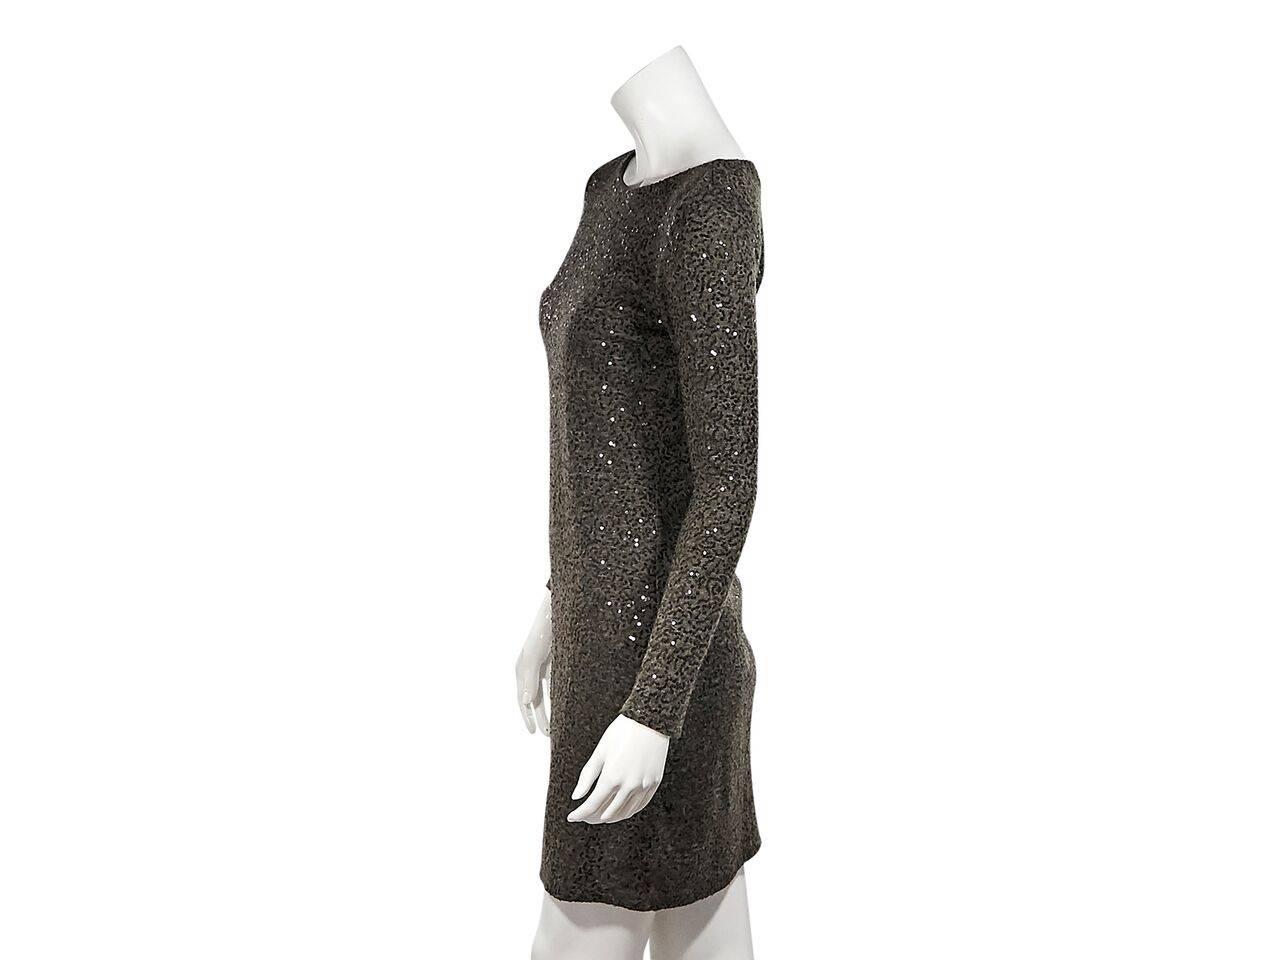 Product details:  Olive green sequin mini dress by Alice + Olivia.  Wide jewelneck.  Long sleeves.  Exposed back zip closure.  Sheer back panel. 
Condition: Pre-owned. Very good.
Est. Retail $ 298.00